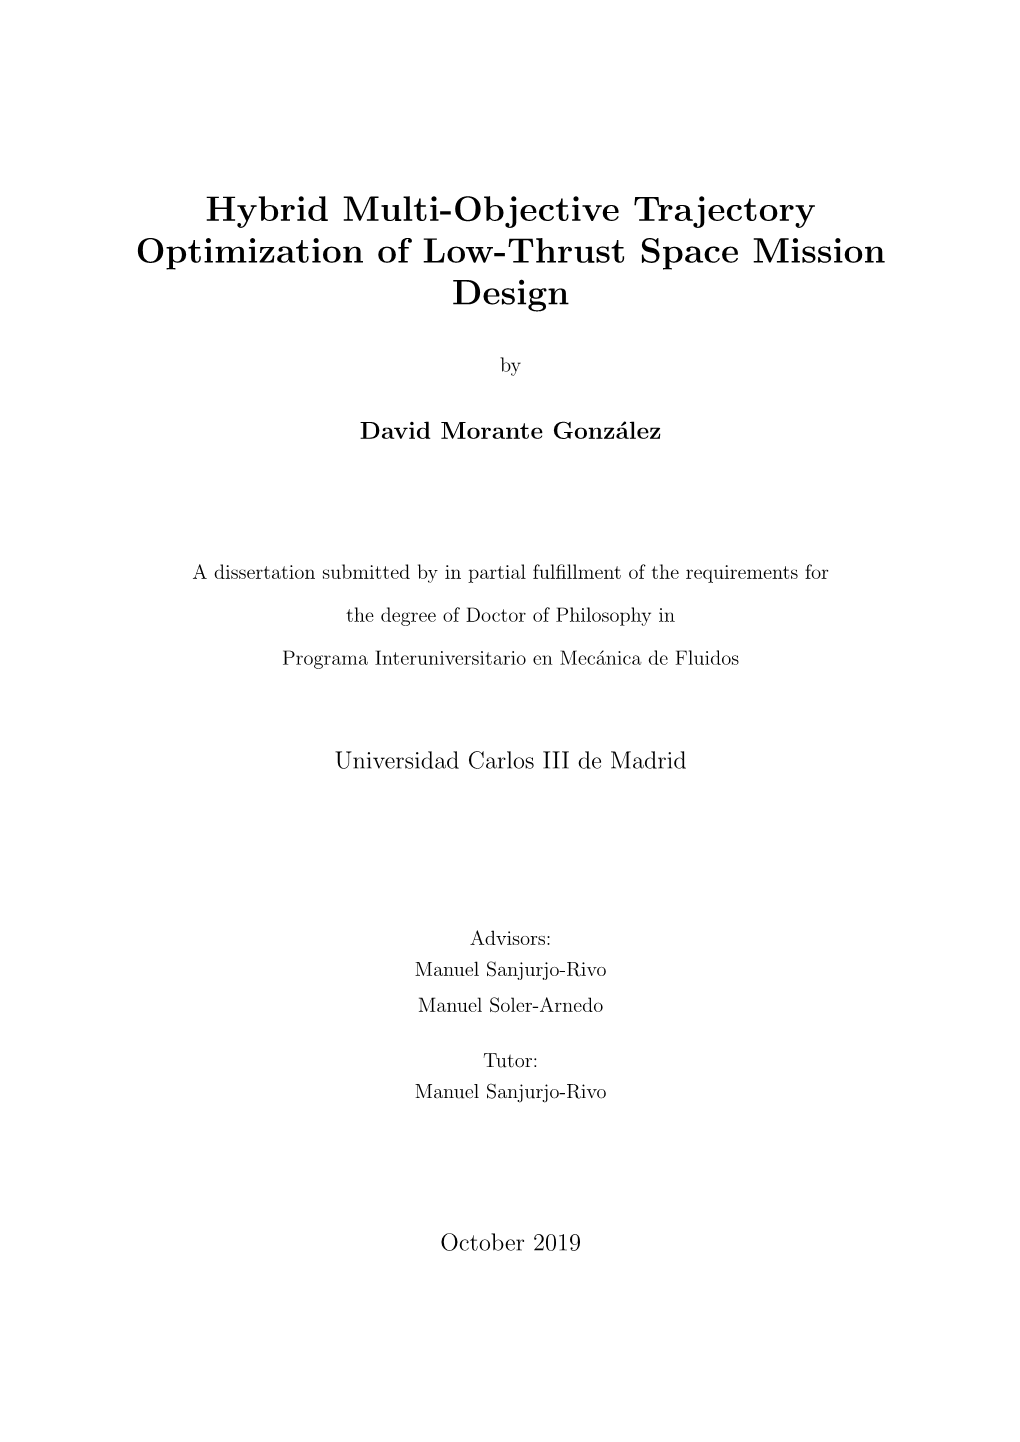 Hybrid Multi-Objective Trajectory Optimization of Low-Thrust Space Mission Design